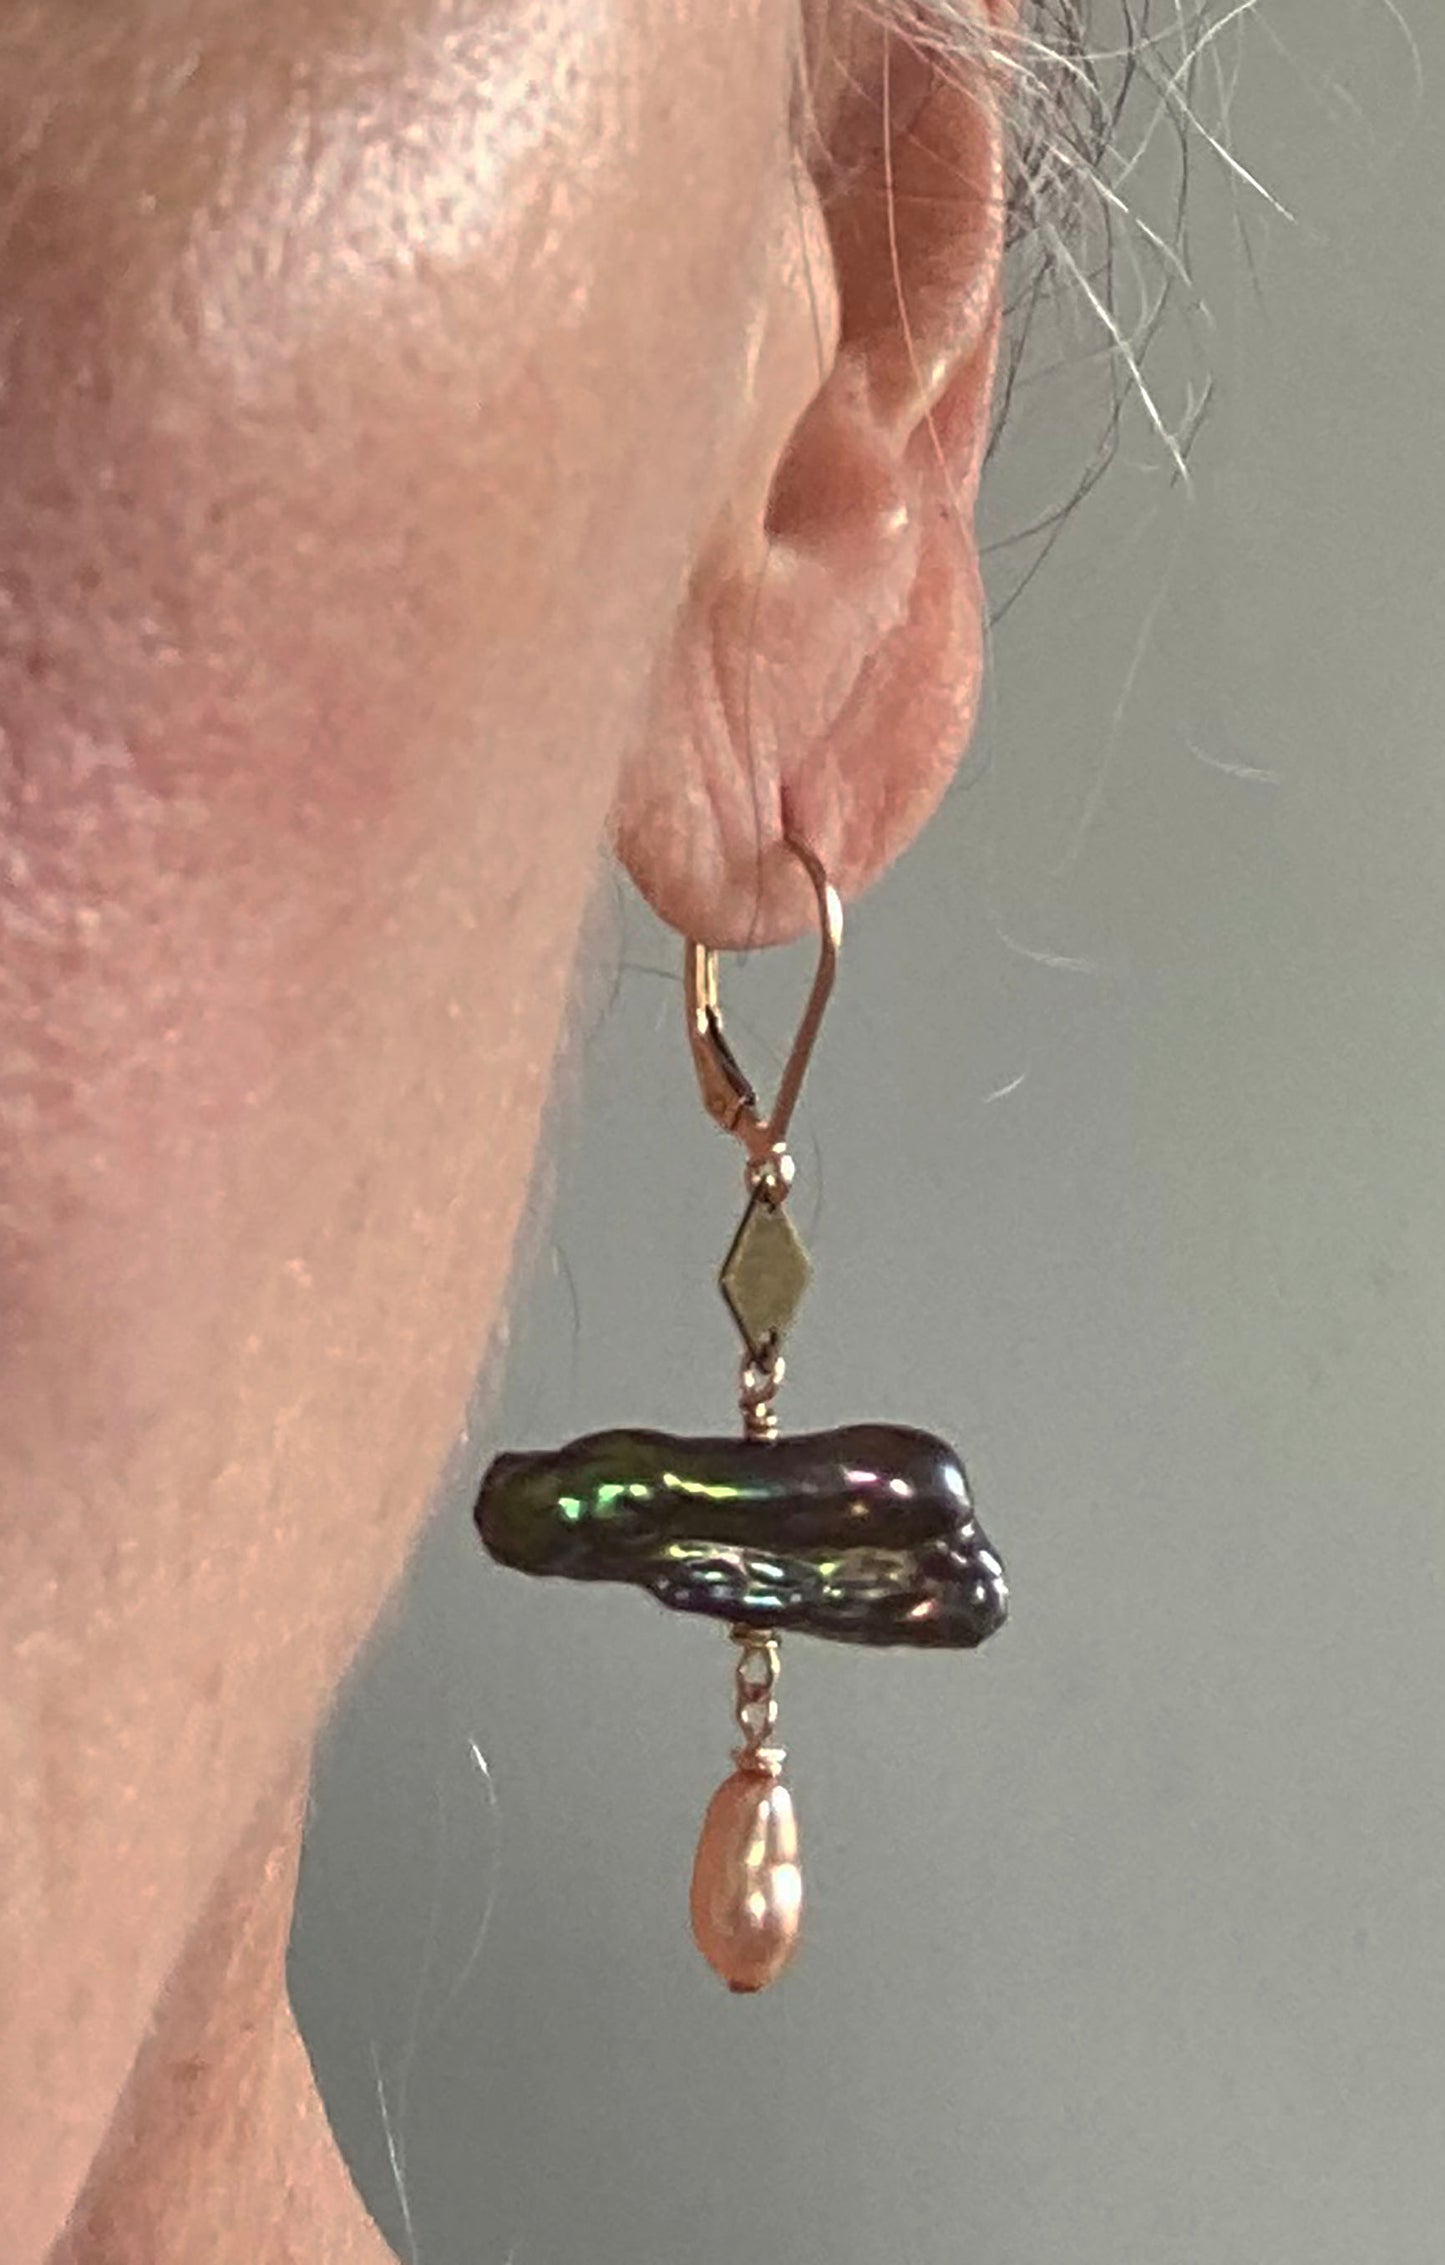 Iridescent Brown Keshi with Gold Drop and Harlequin on 14k Gold Filled Ear Wires by Linda Queally